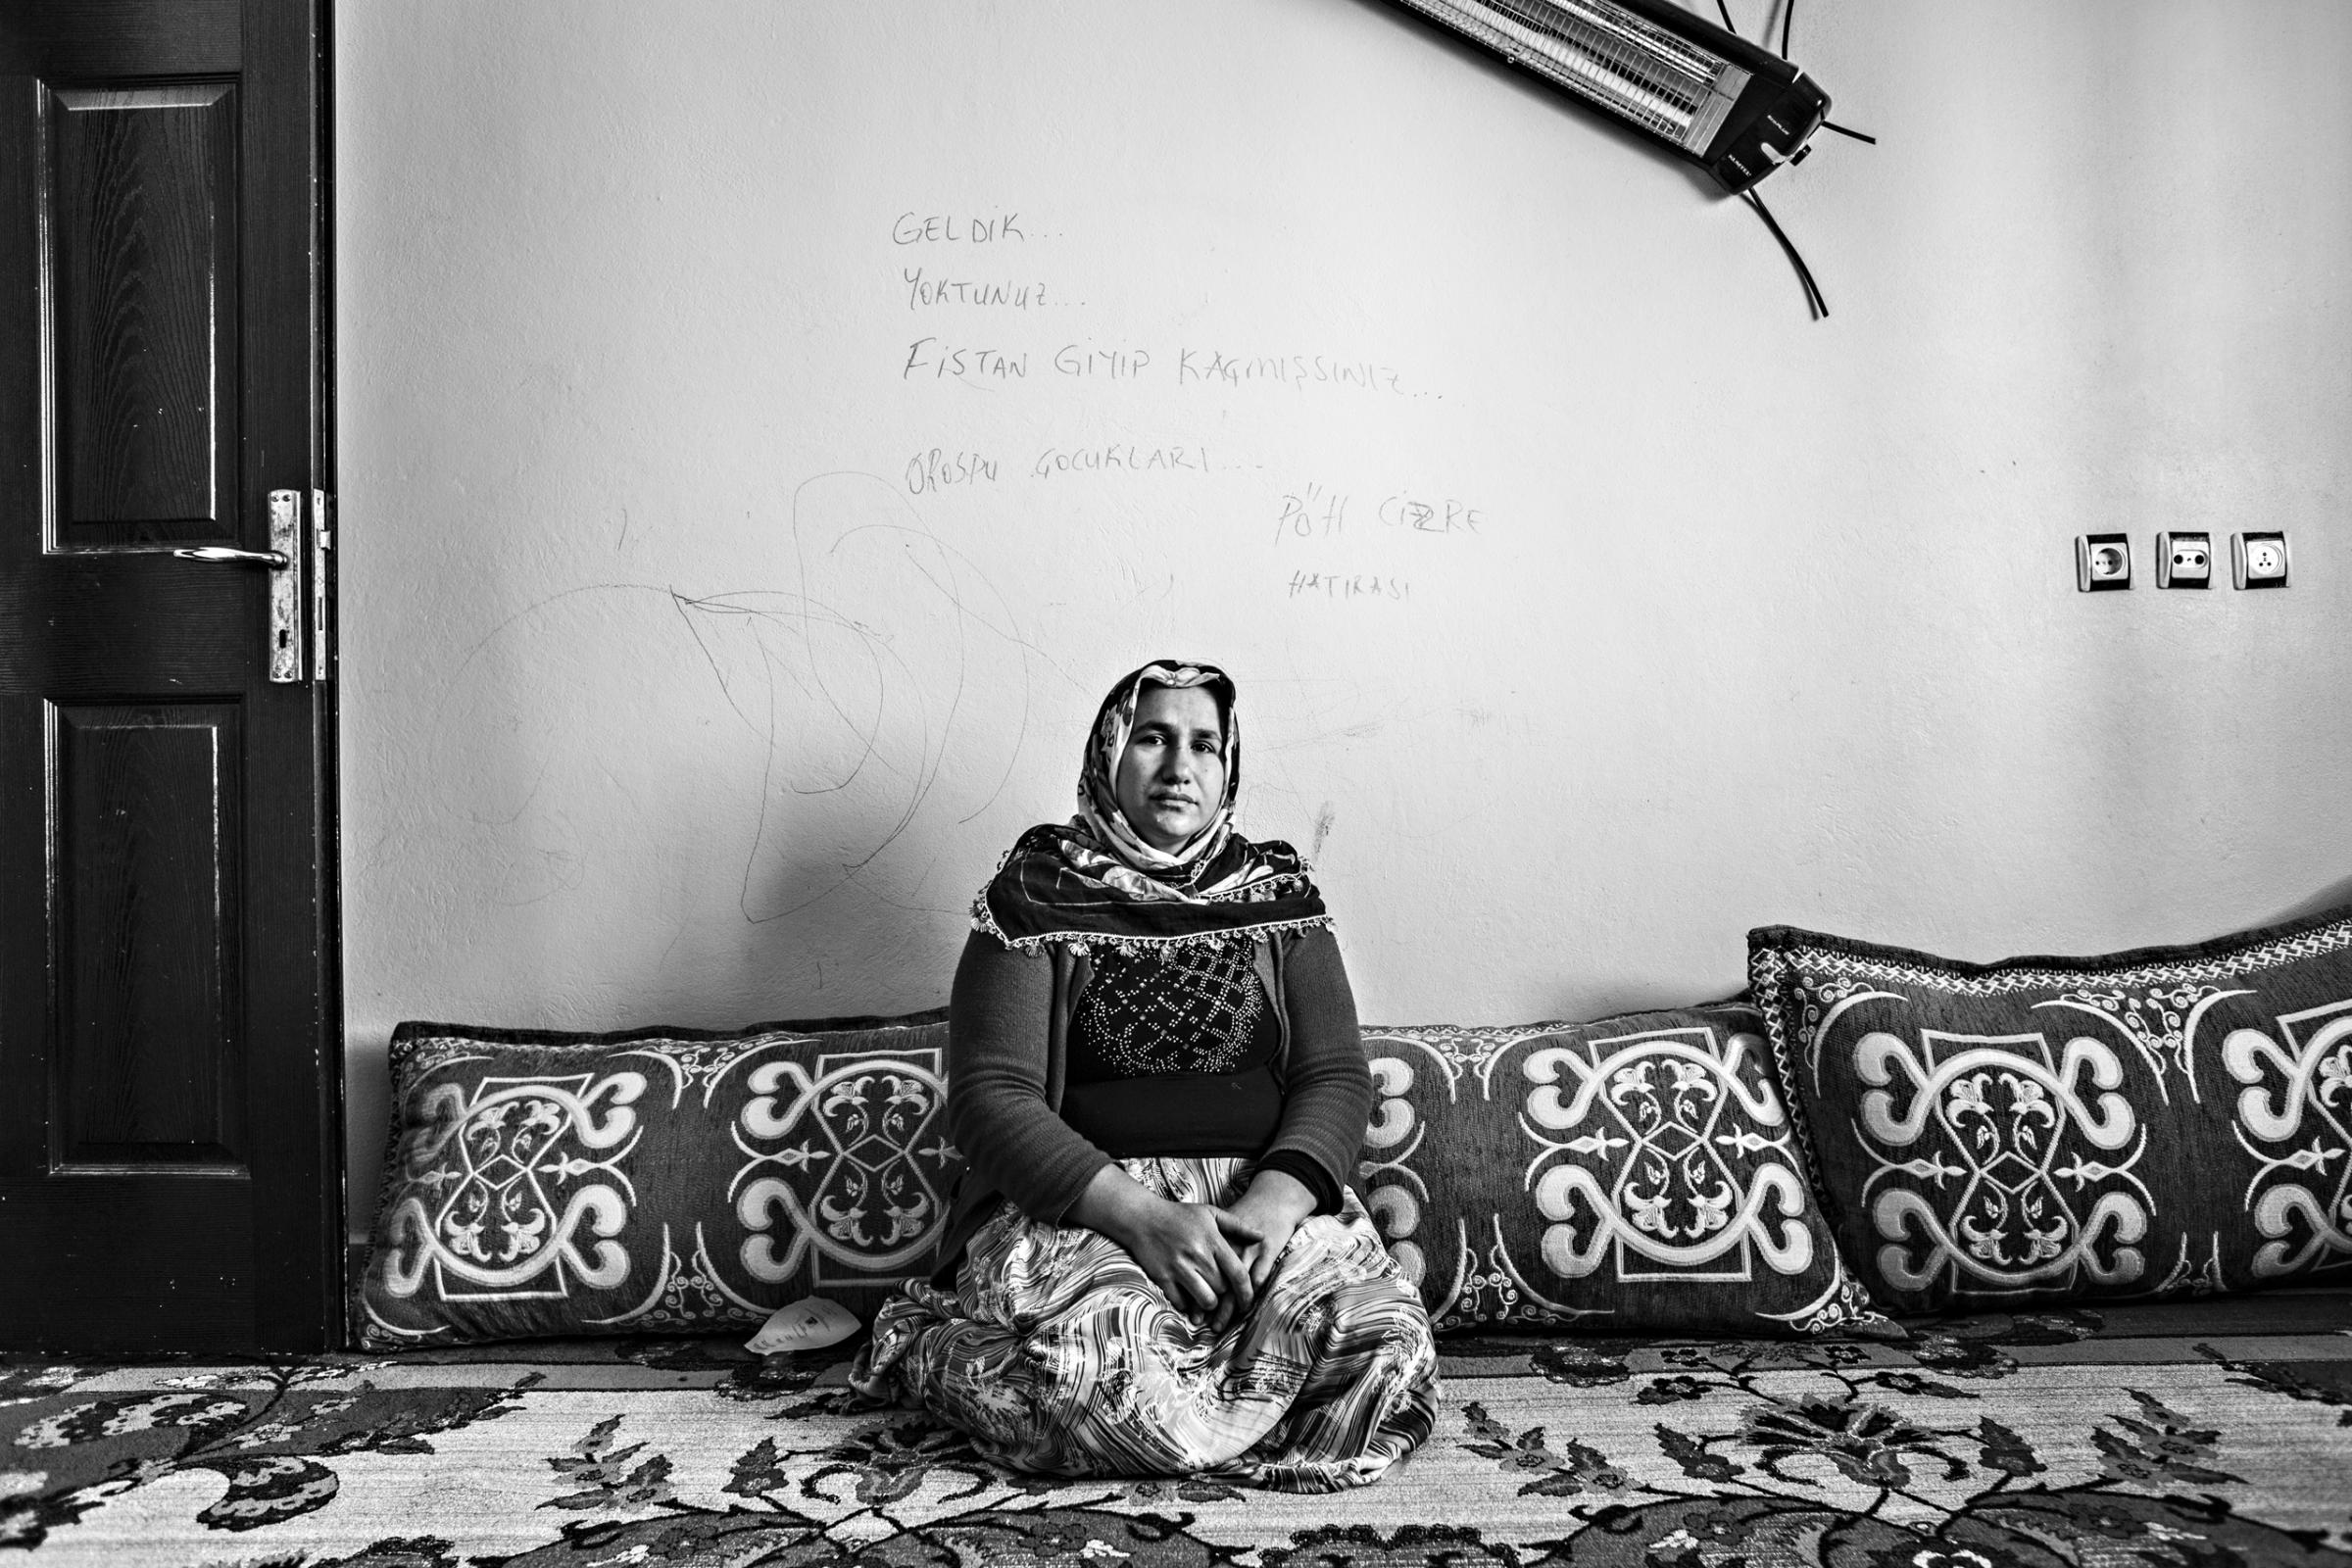 Fatma Tetik sits near a wall with threatening graffiti written by Turkish special forces. Her husband, Ali Tetik, was killed during fighting between Turkish special forces and PKK (Kurdistan Workers Party), Cizre, March 2016.